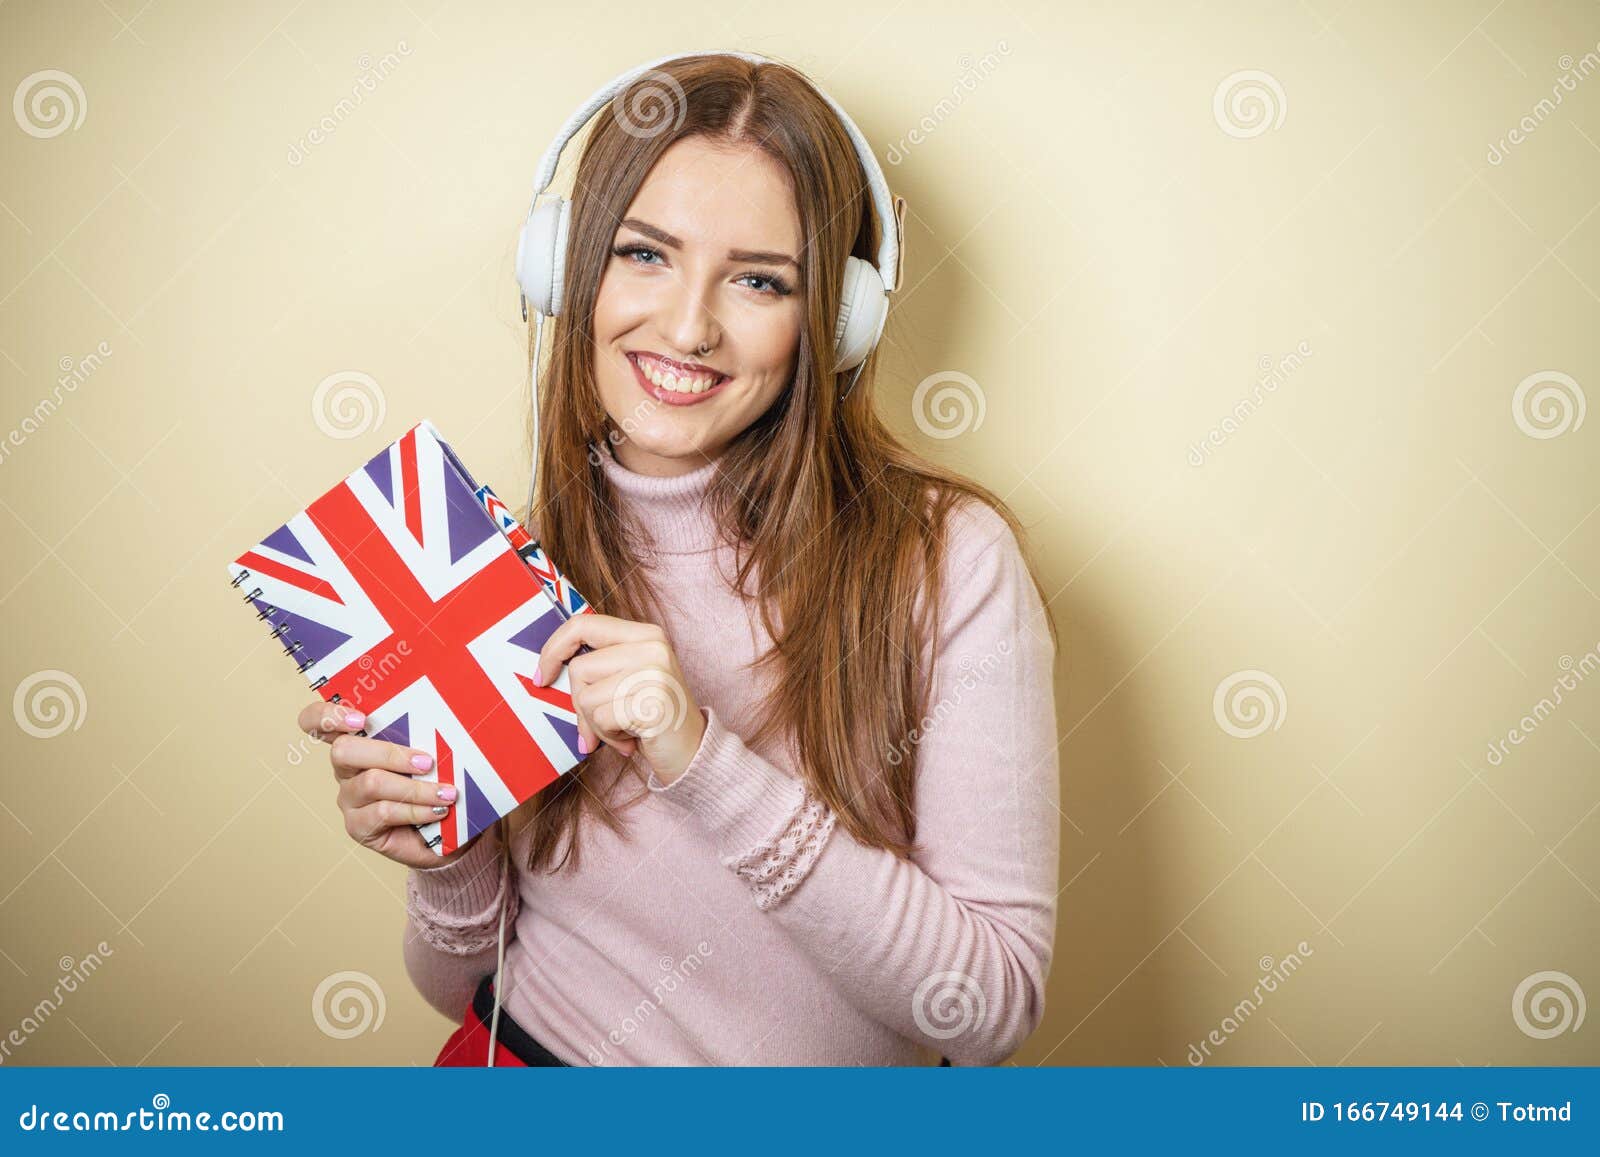 girl learn english. educative content. study english language with audio lessons. girl listen music